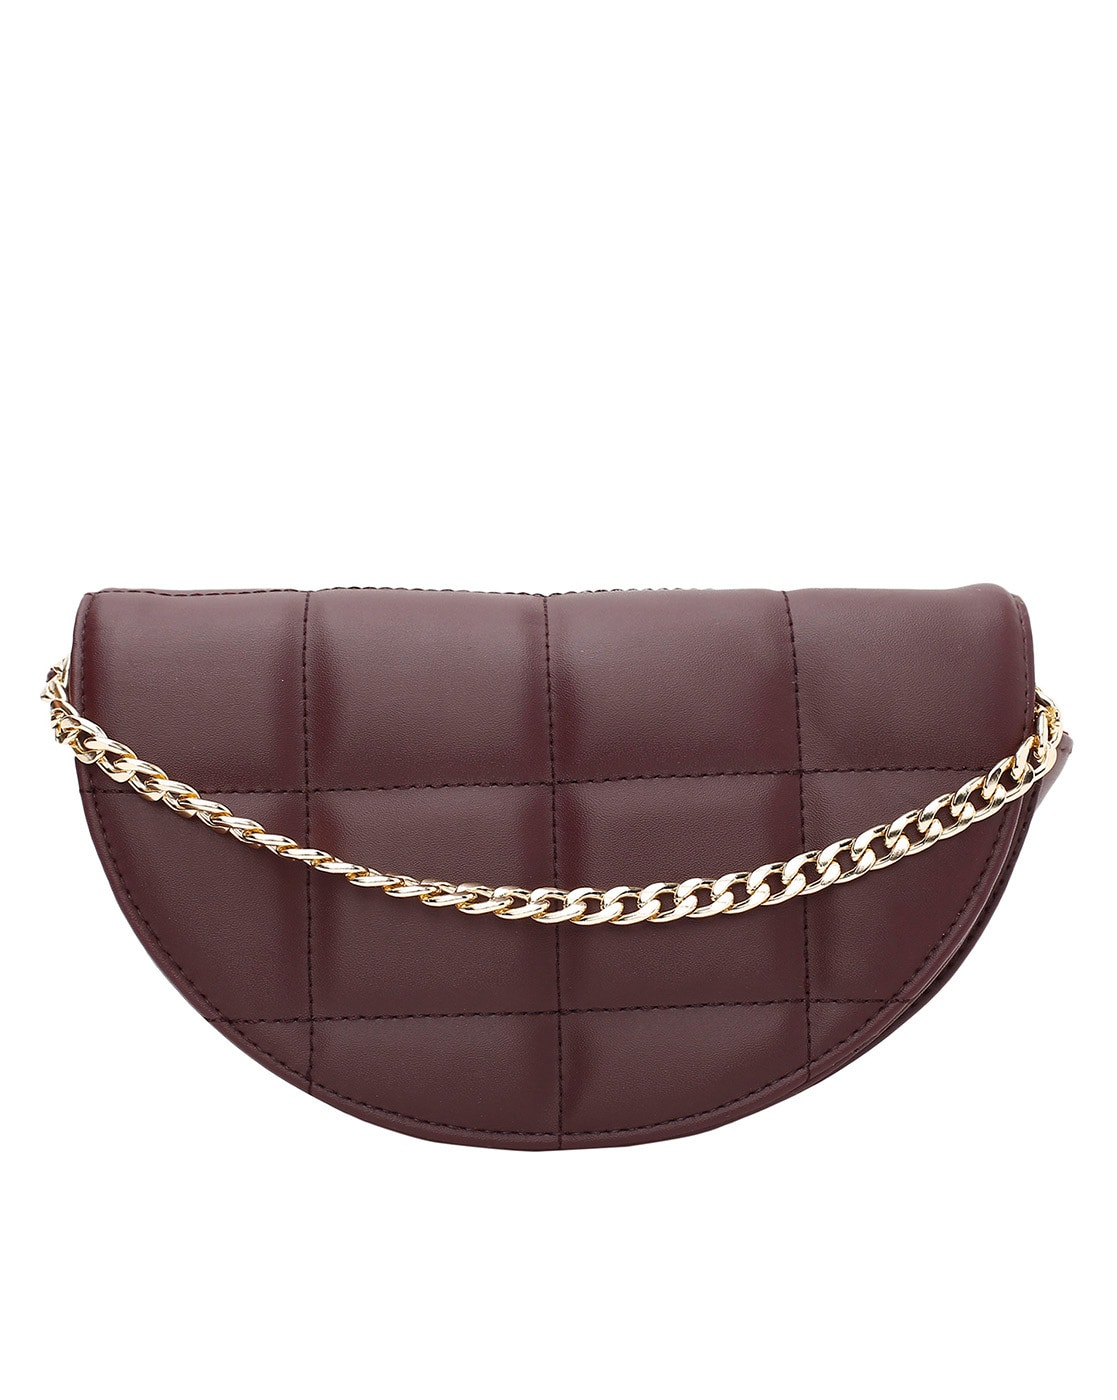 Max Mara Woman's Bags Black Friday | Black Friday Max Mara Bags for Woman  2023: buy online now at GIGLIO.COM!